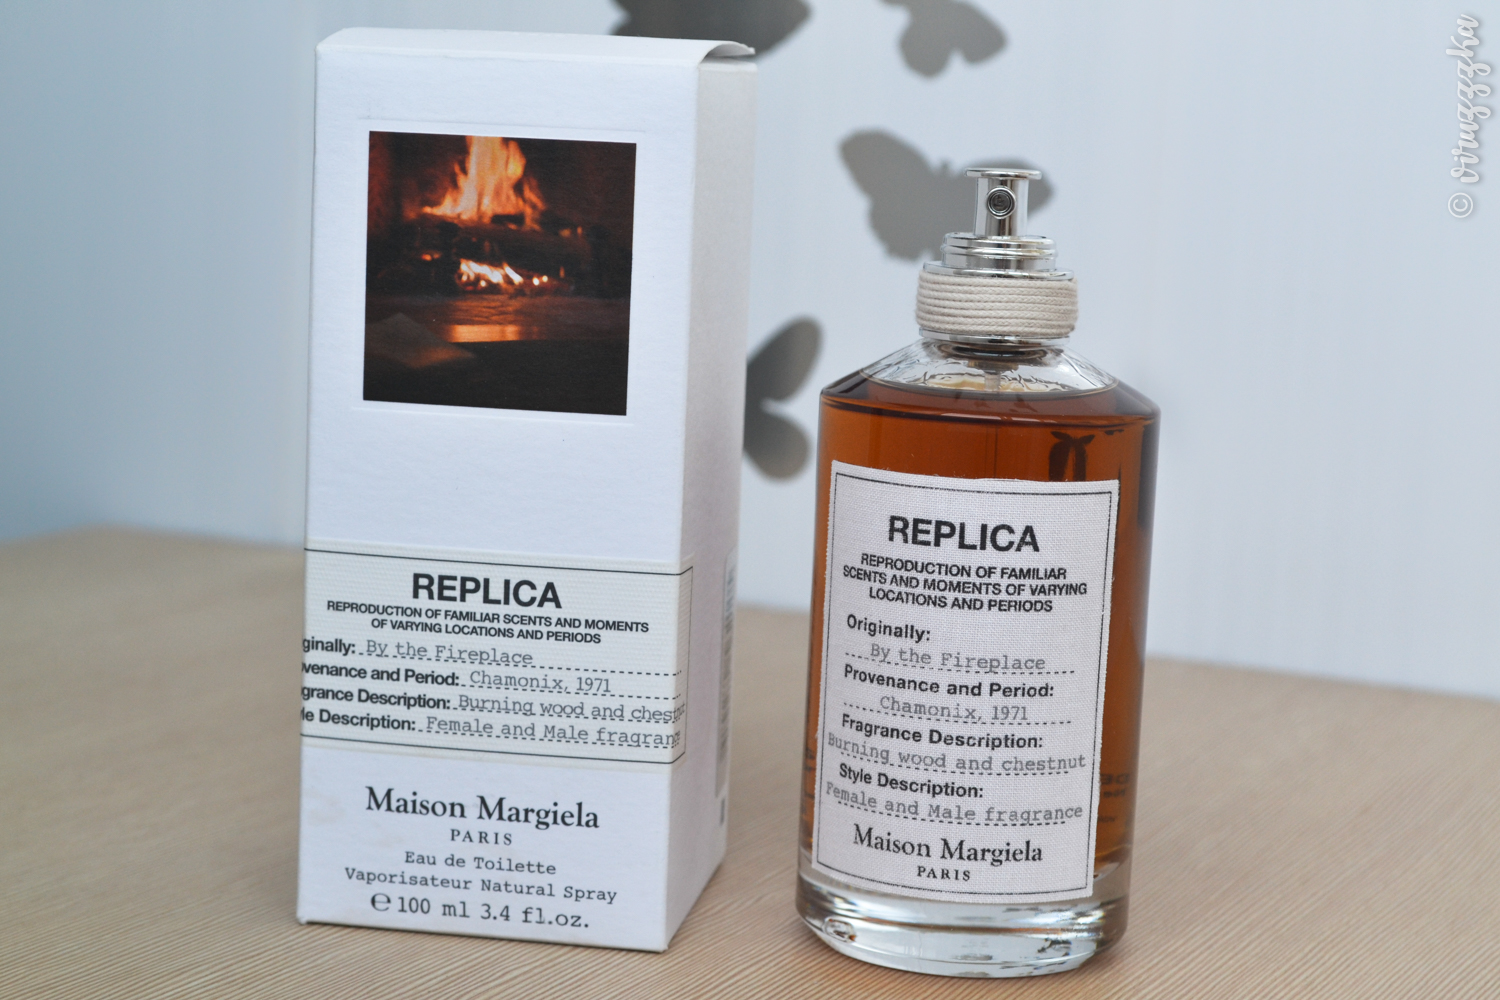 Margiela replica by the fireplace. Maison Martin Margiela Replica by the Fireplace. Maison Margiela Replica by the Fireplace 30мл. Replica Maison Margiela Fireplace. Maison Martin Margiela Replica by the Fireplace туалетная вода 100мл.